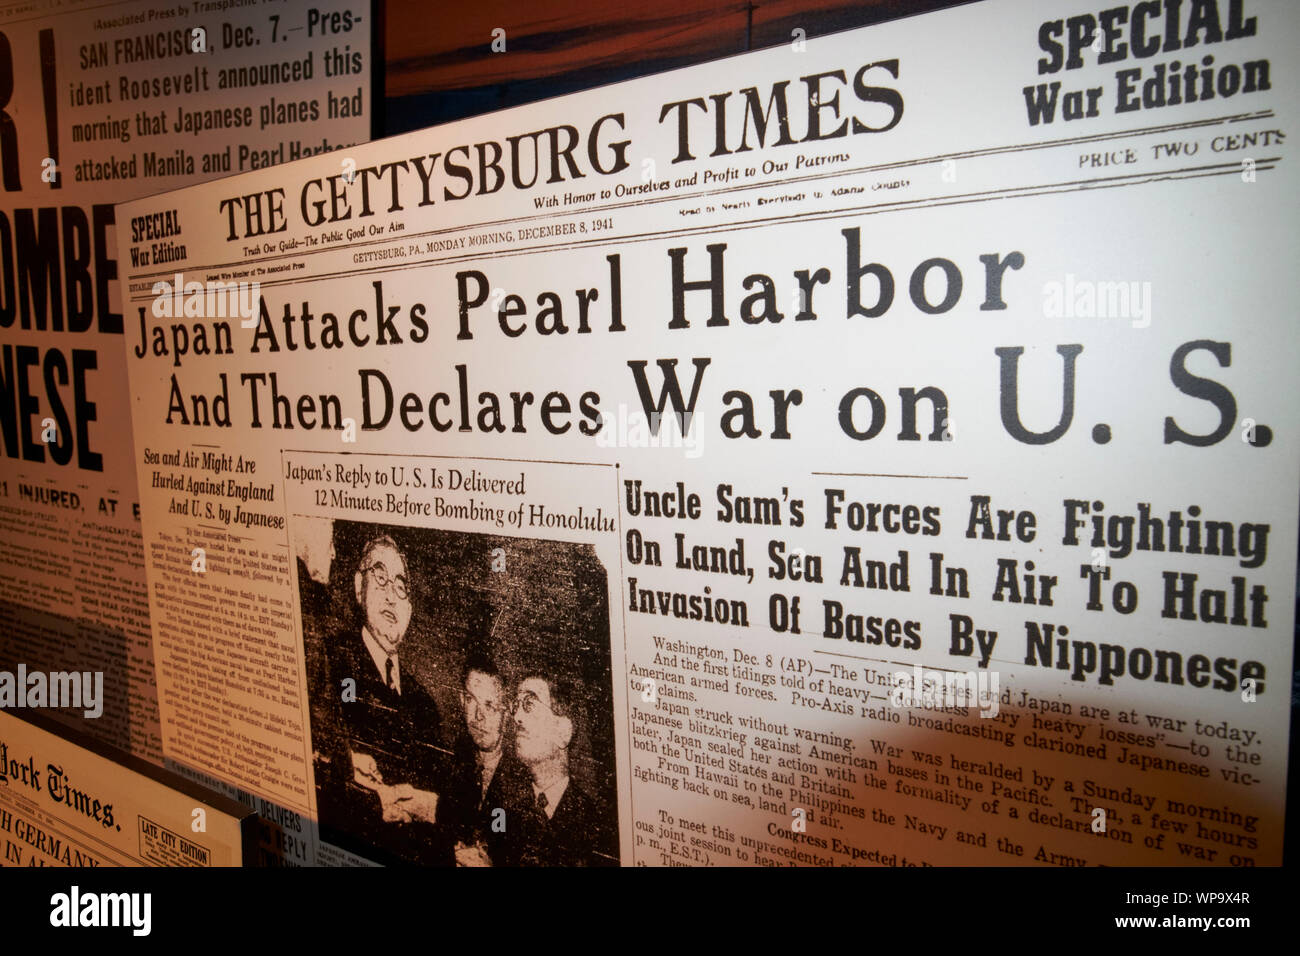 museum display of historic gettysburg times newspaper headline of japanese attack on pearl harbor Chicago Illinois USA Stock Photo